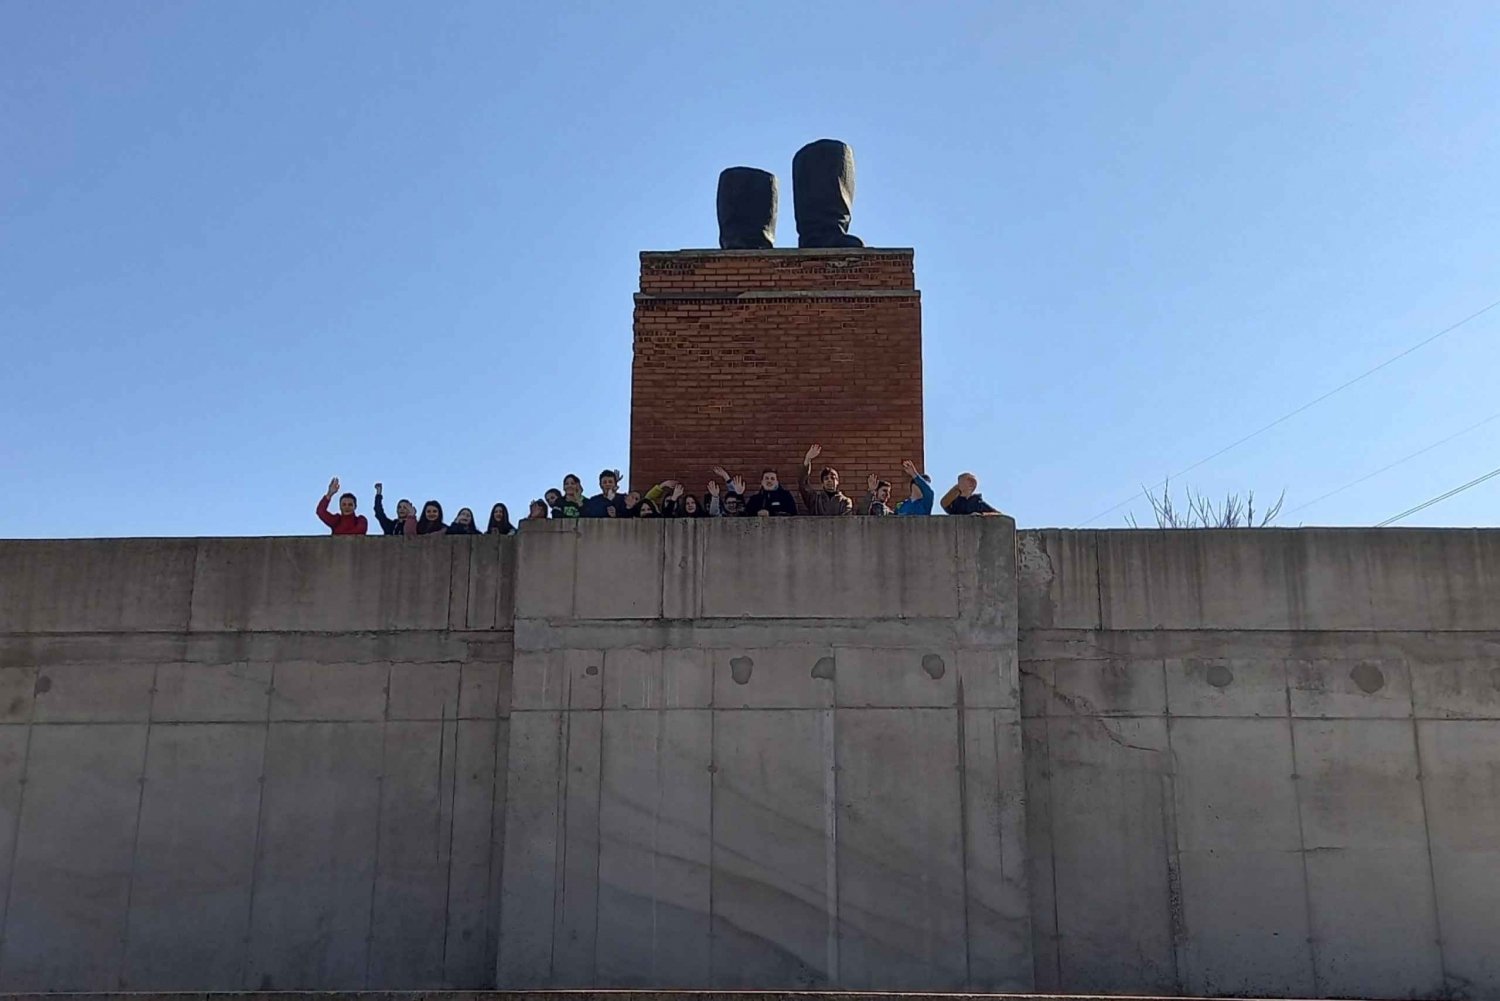 Memento Park: Official Guided Tour with Entry Ticket